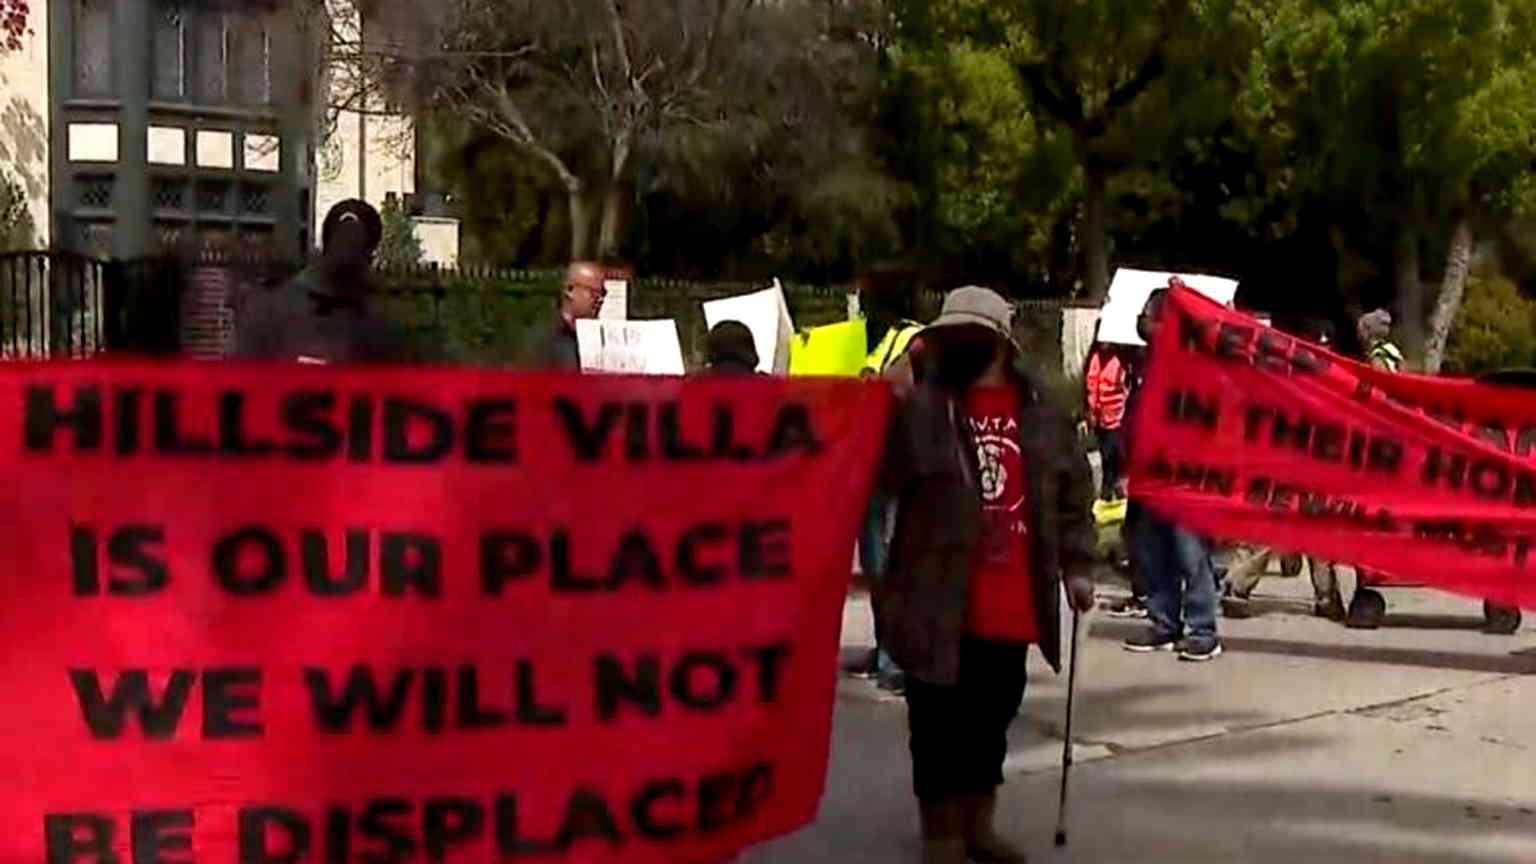 LA Chinatown tenants rally against 300% increase in rent